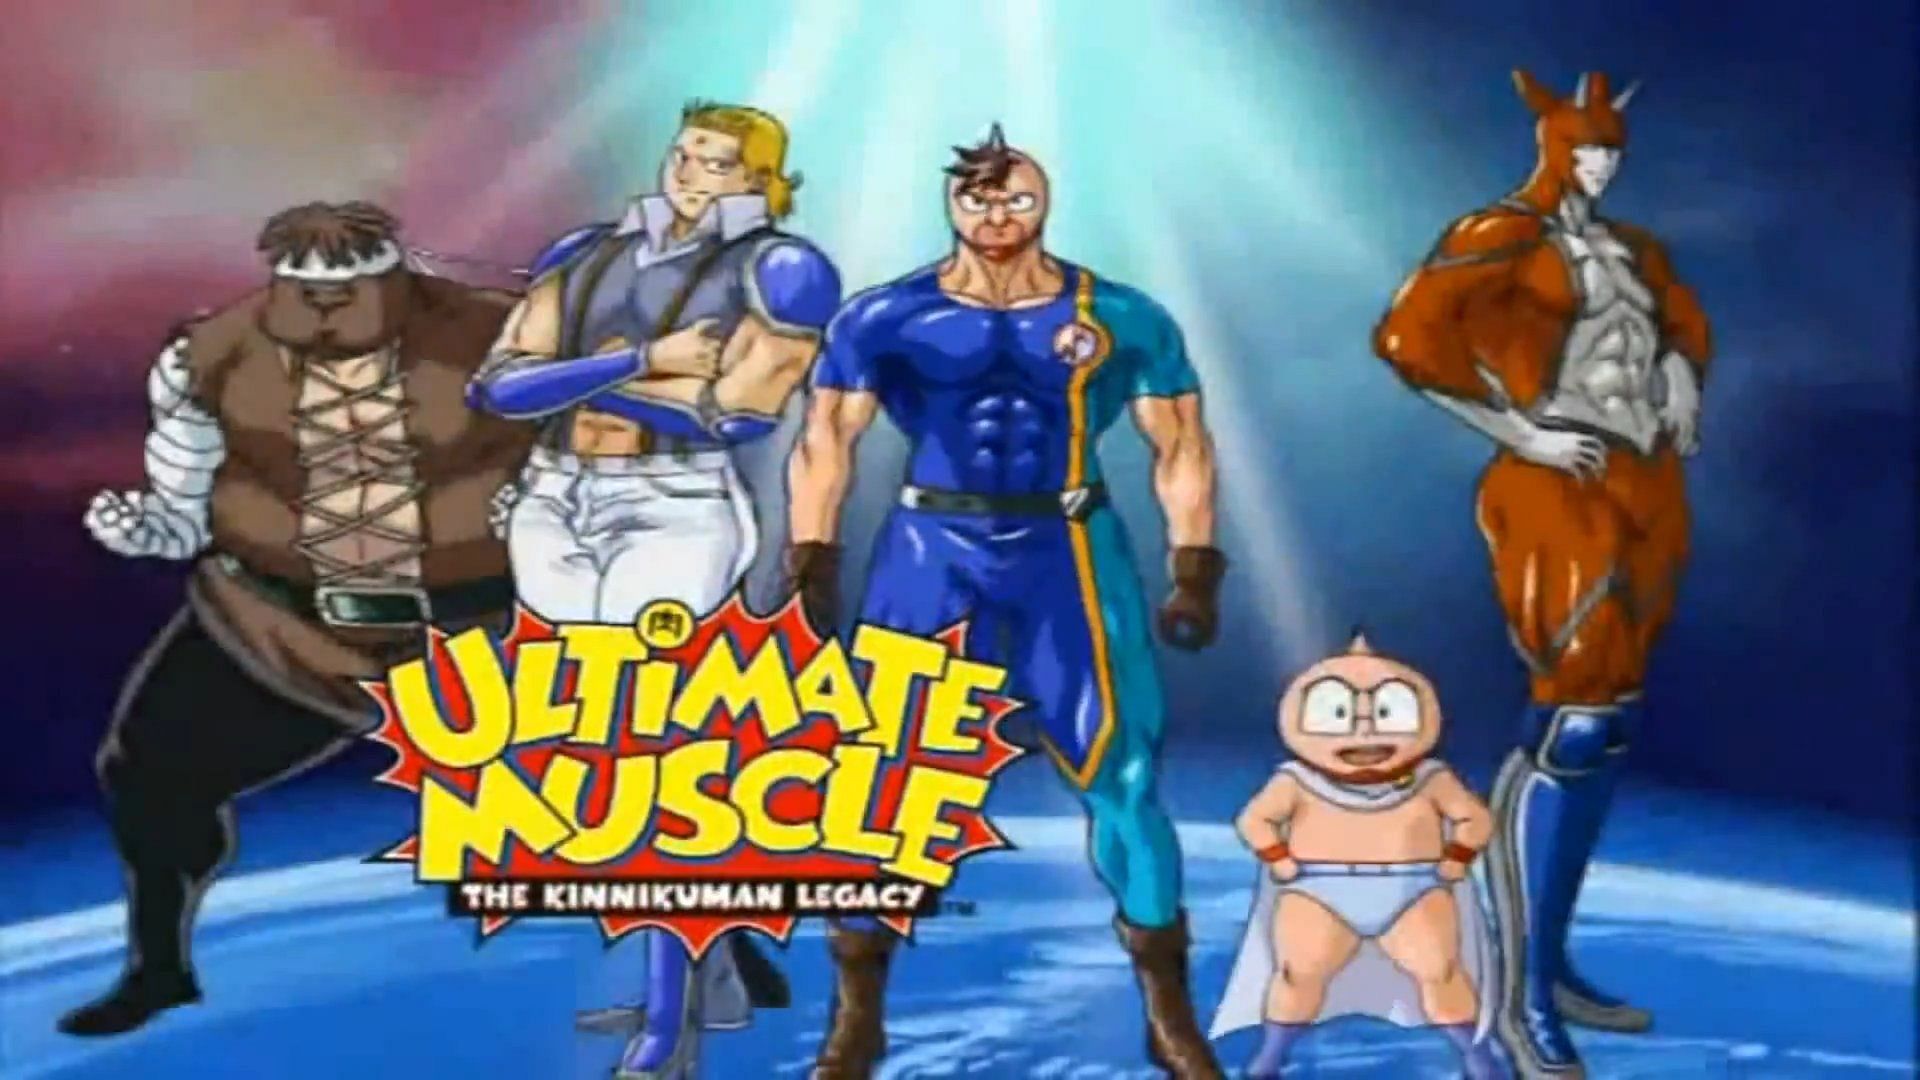 Ultimate Muscle&#039;s pro-wrestling inspired characters and storyline make it a perfect post-WrestleMania 40 watch (Image via Toei Animation)